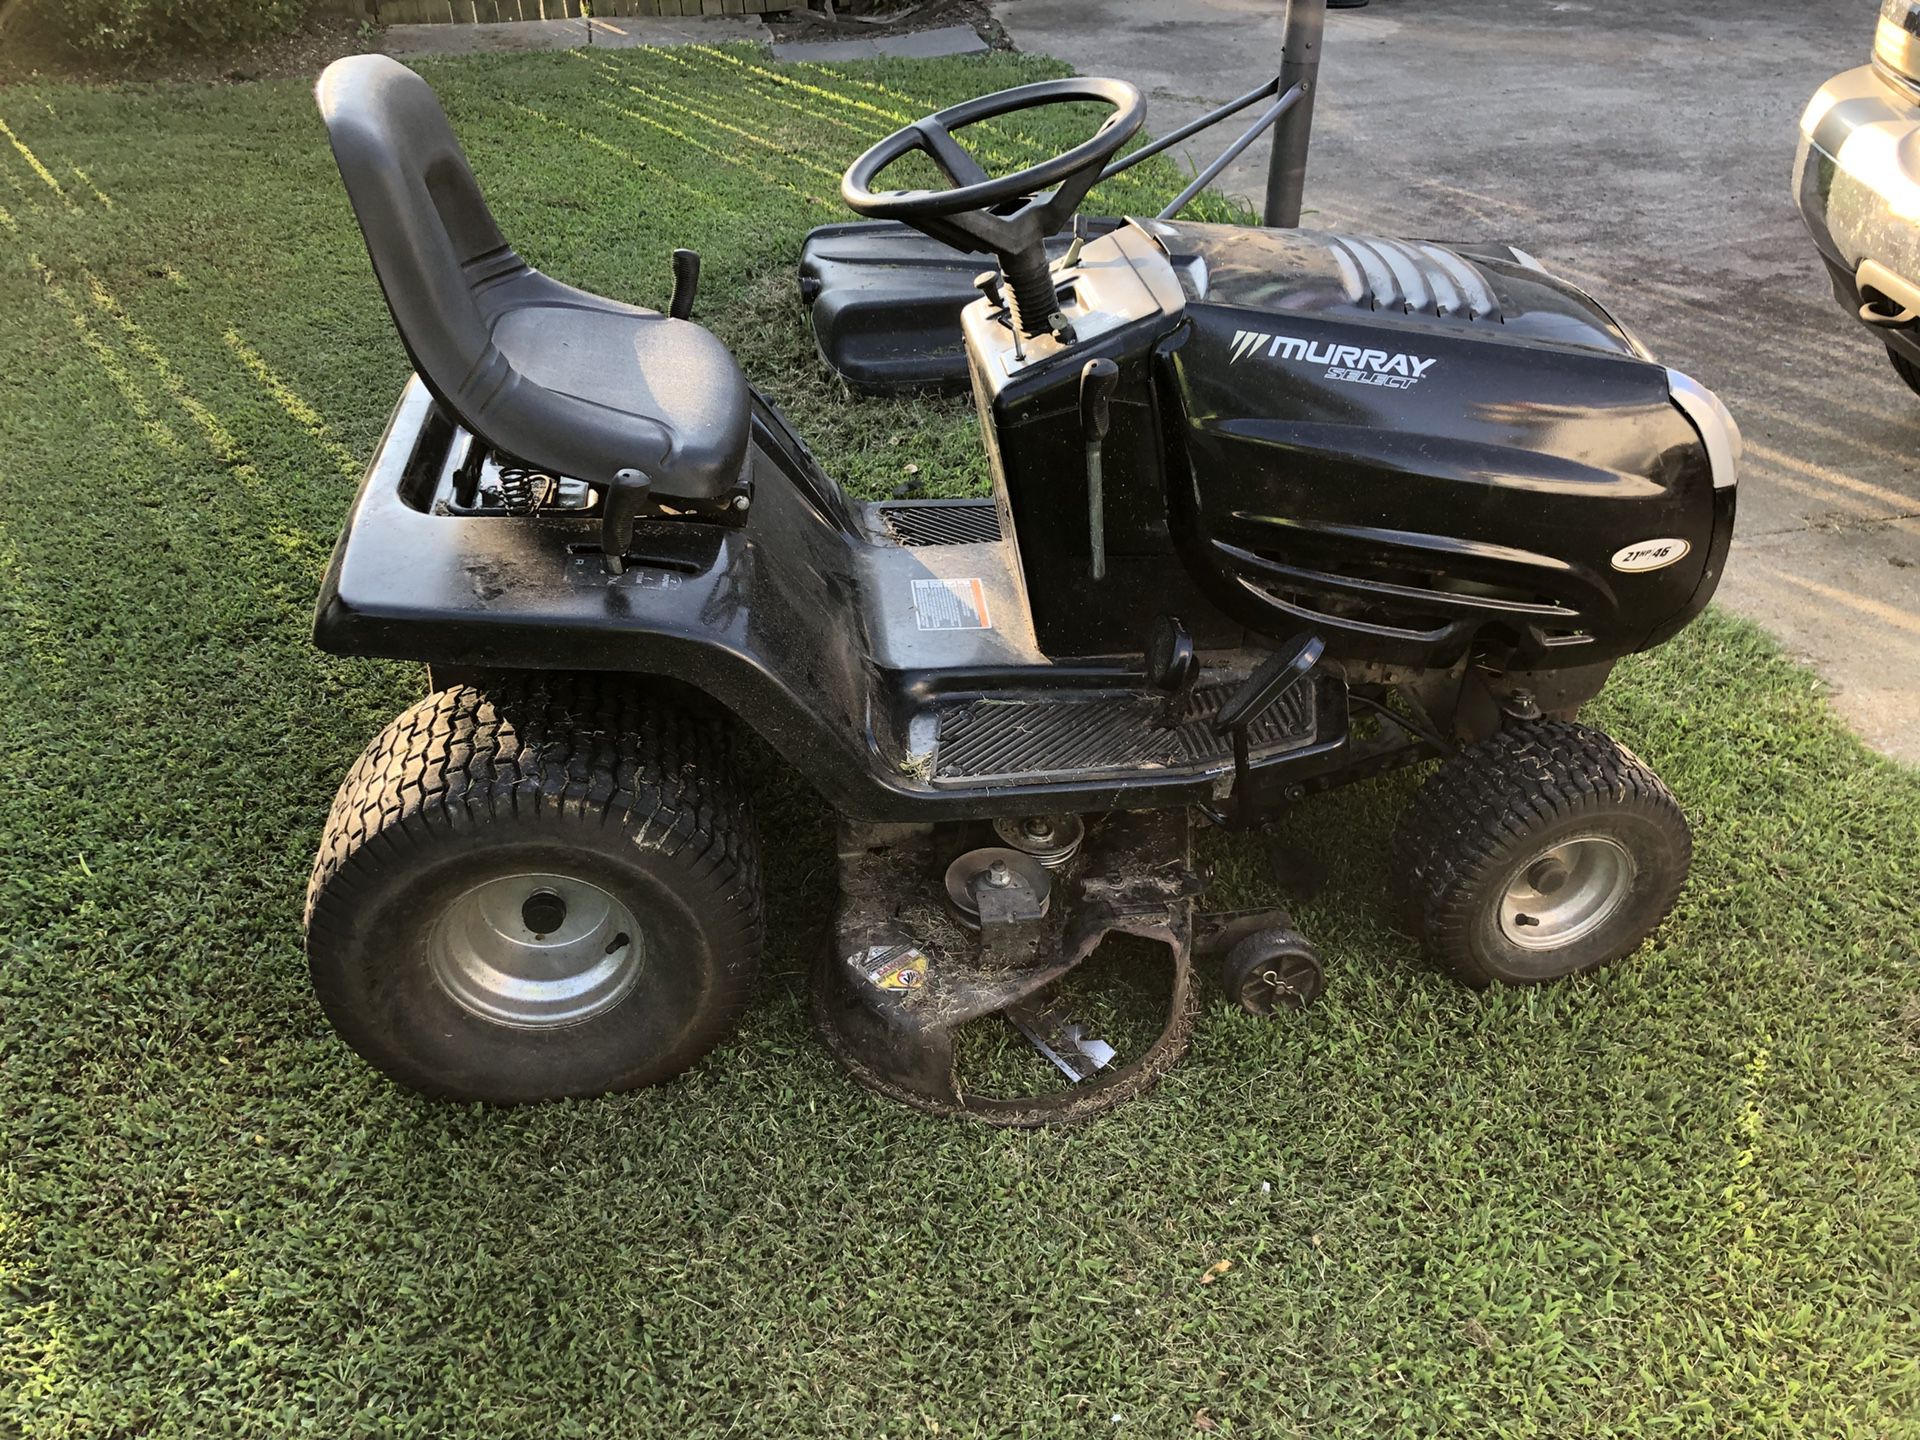 Murray select 46” riding lawn mower